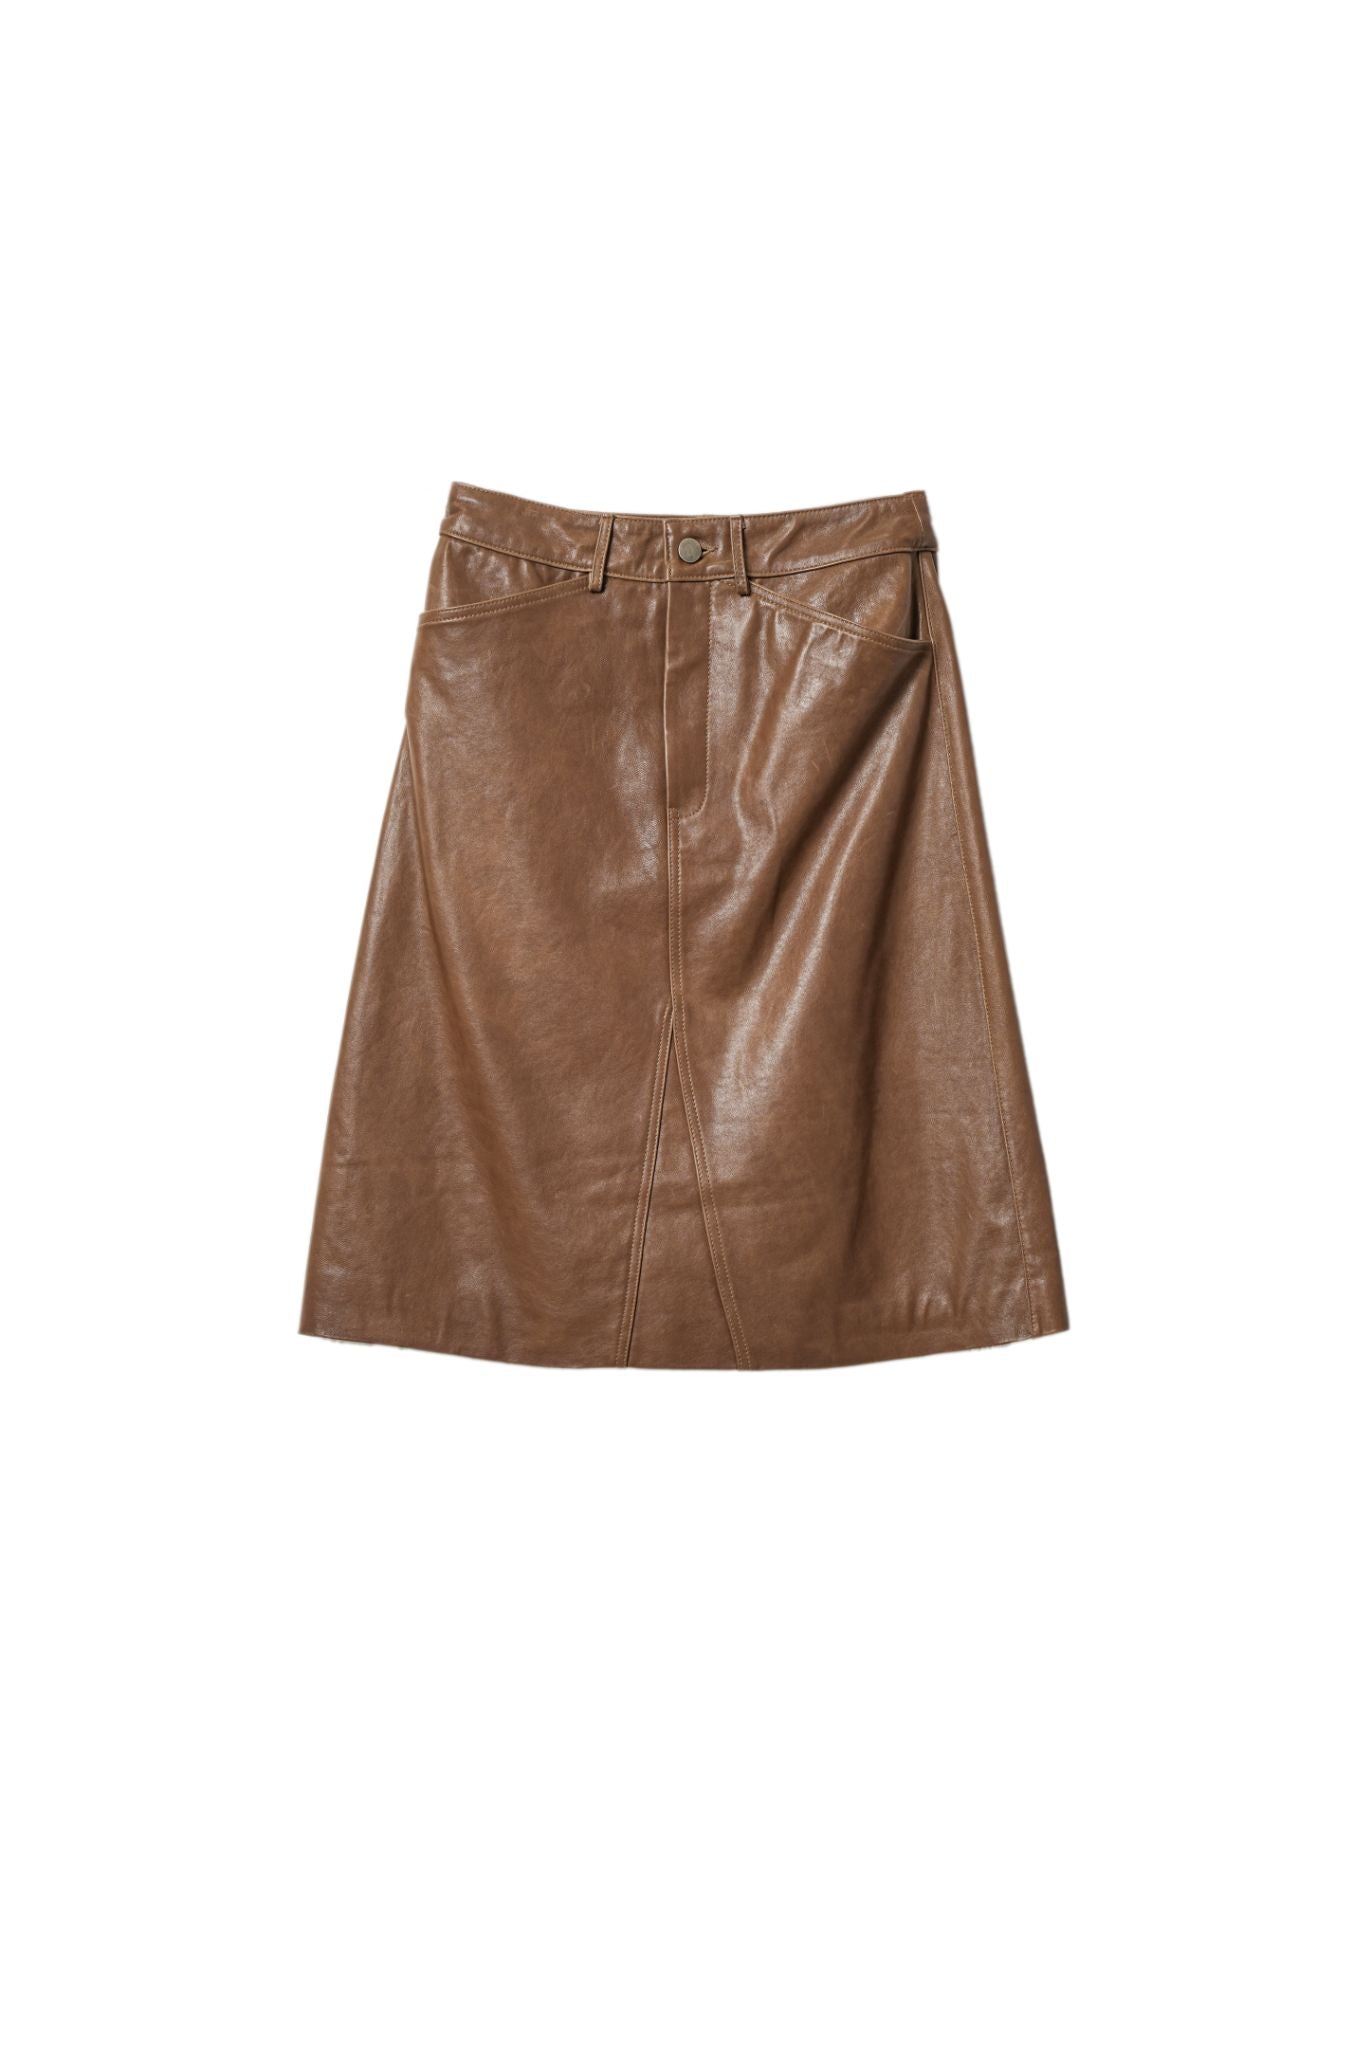 Leather Luxe: Stylish Leather Skirt Ensemble